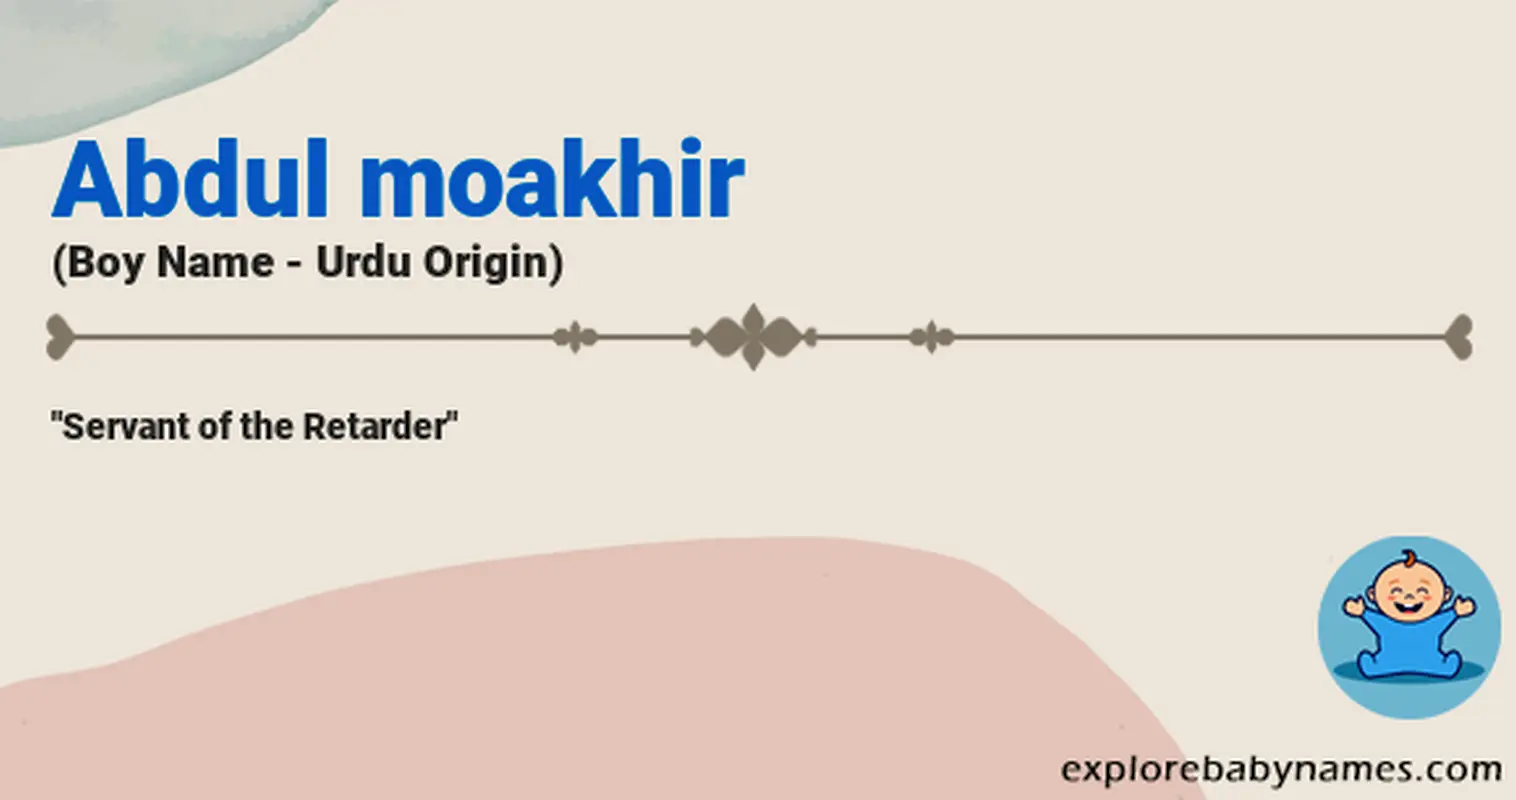 Meaning of Abdul moakhir